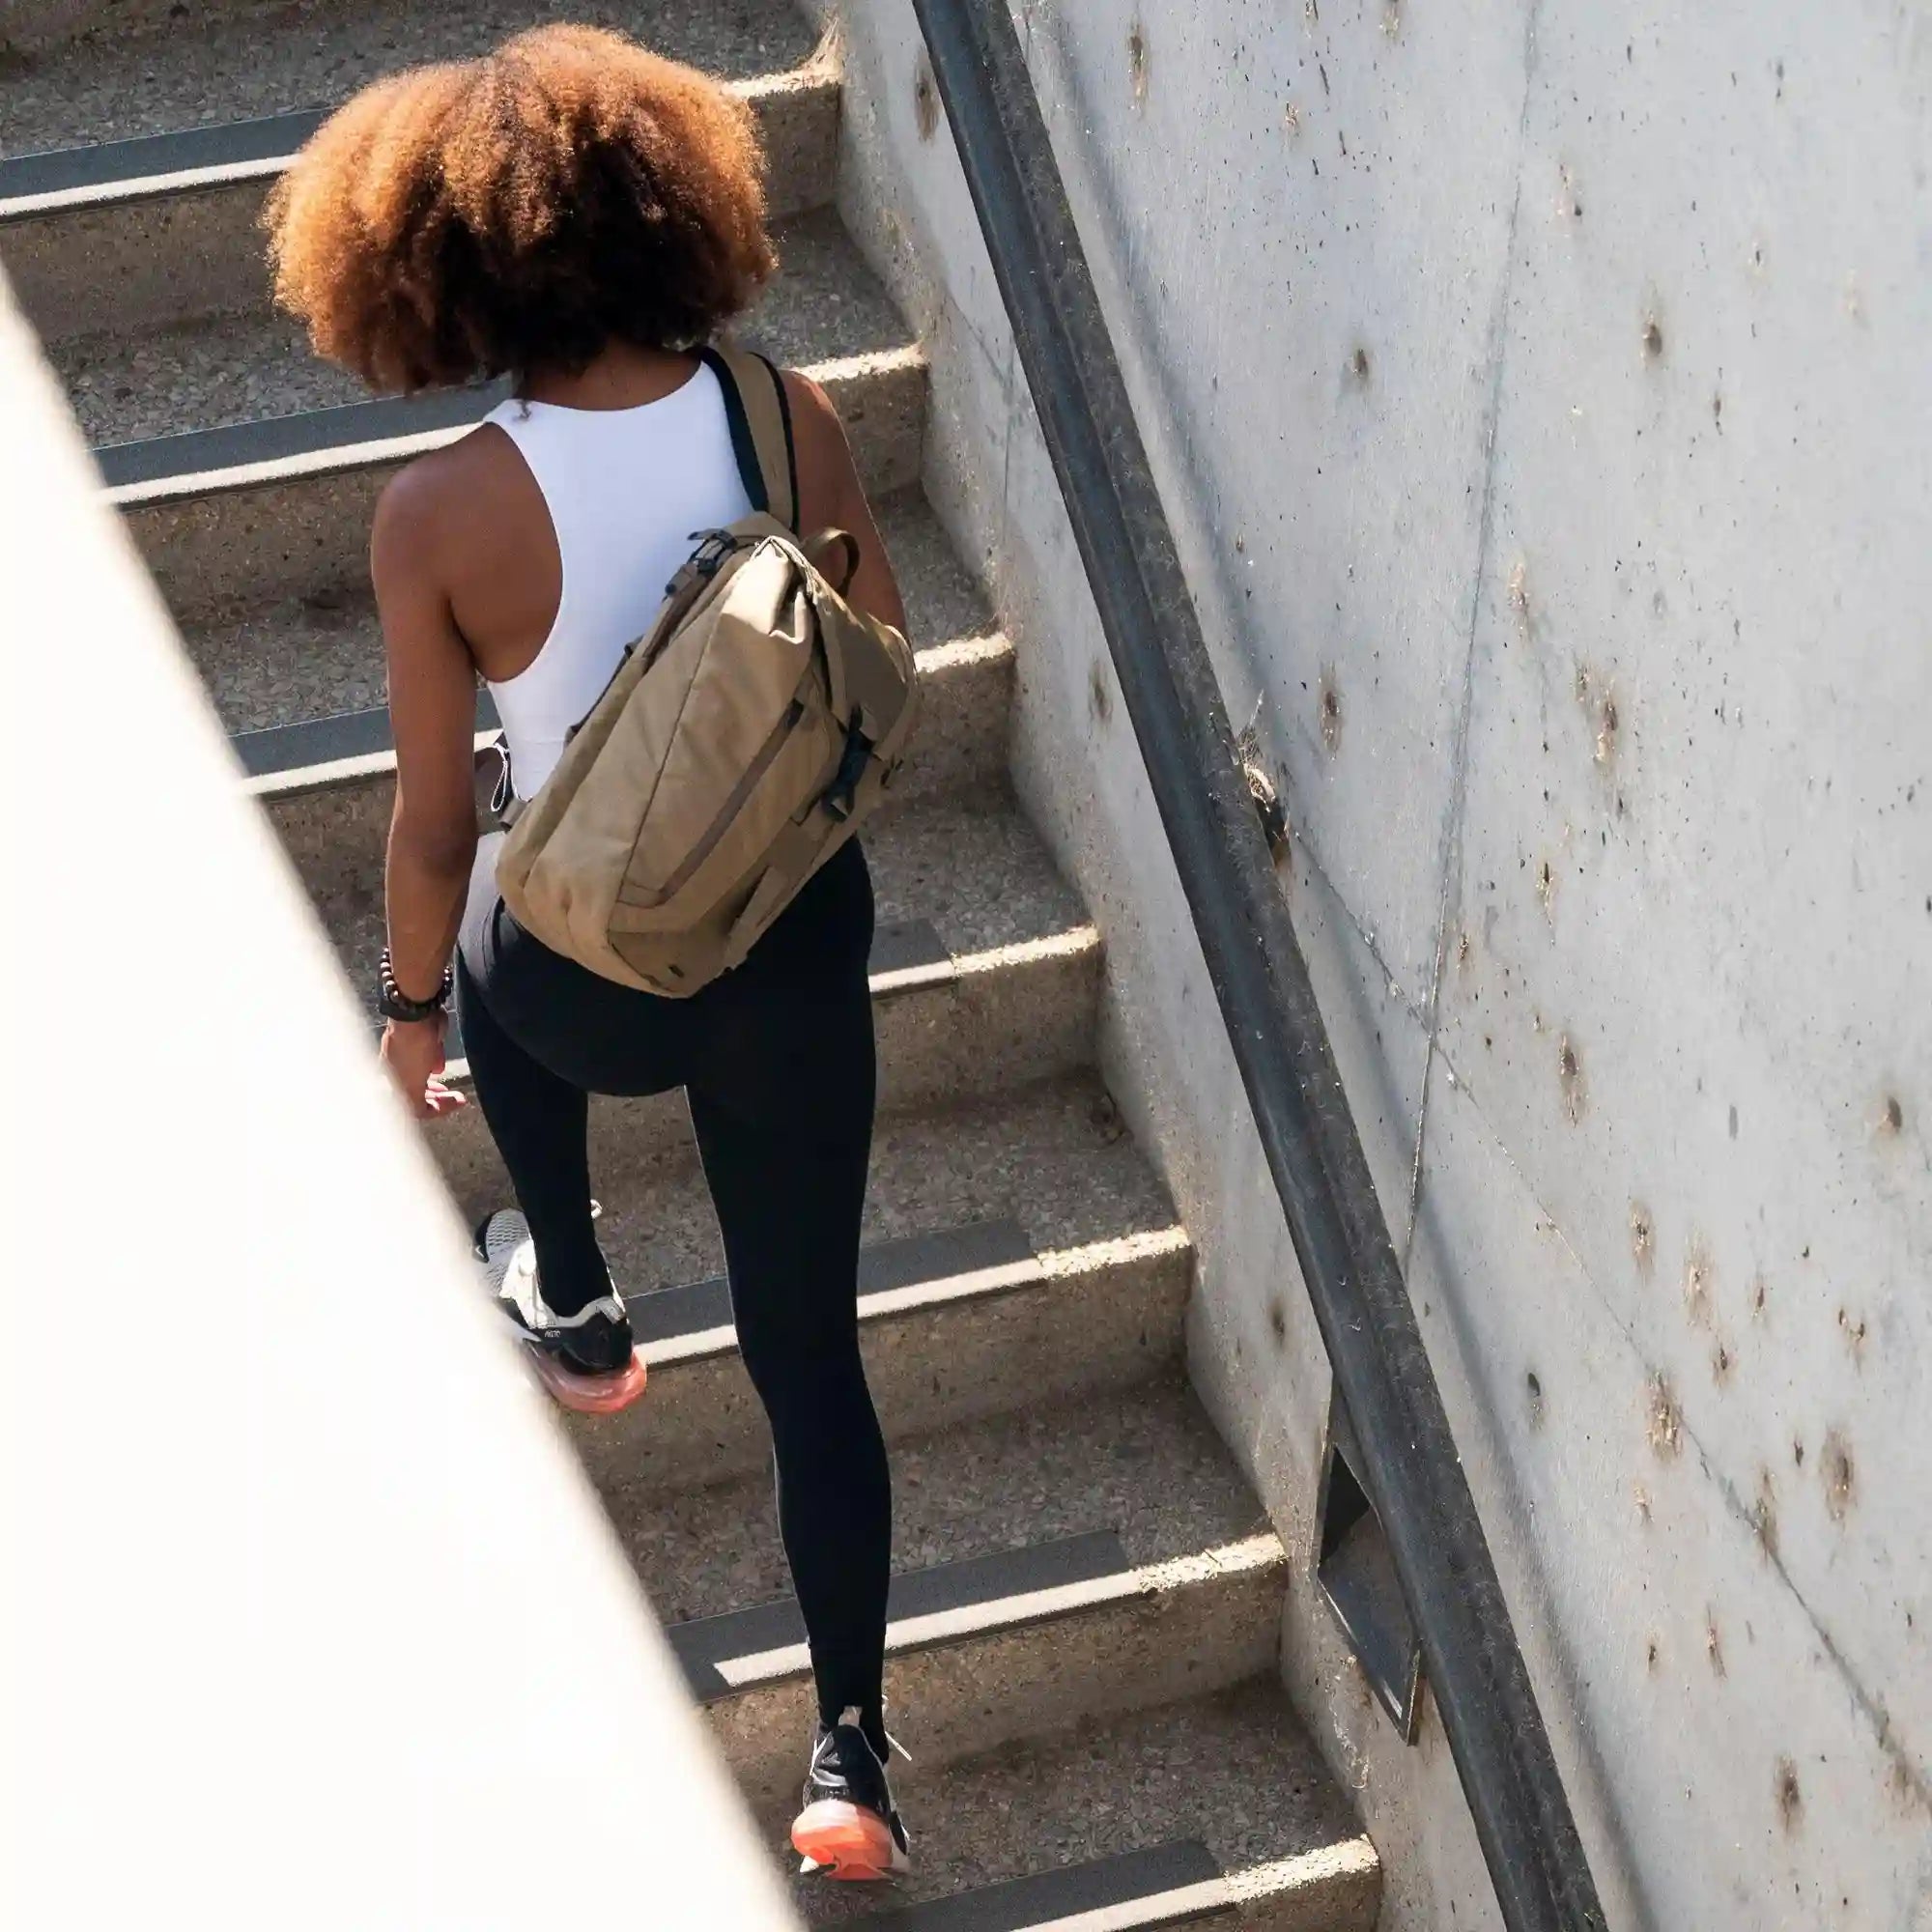 A young woman climbs some stairs with her Errant Sling strapped across her back.